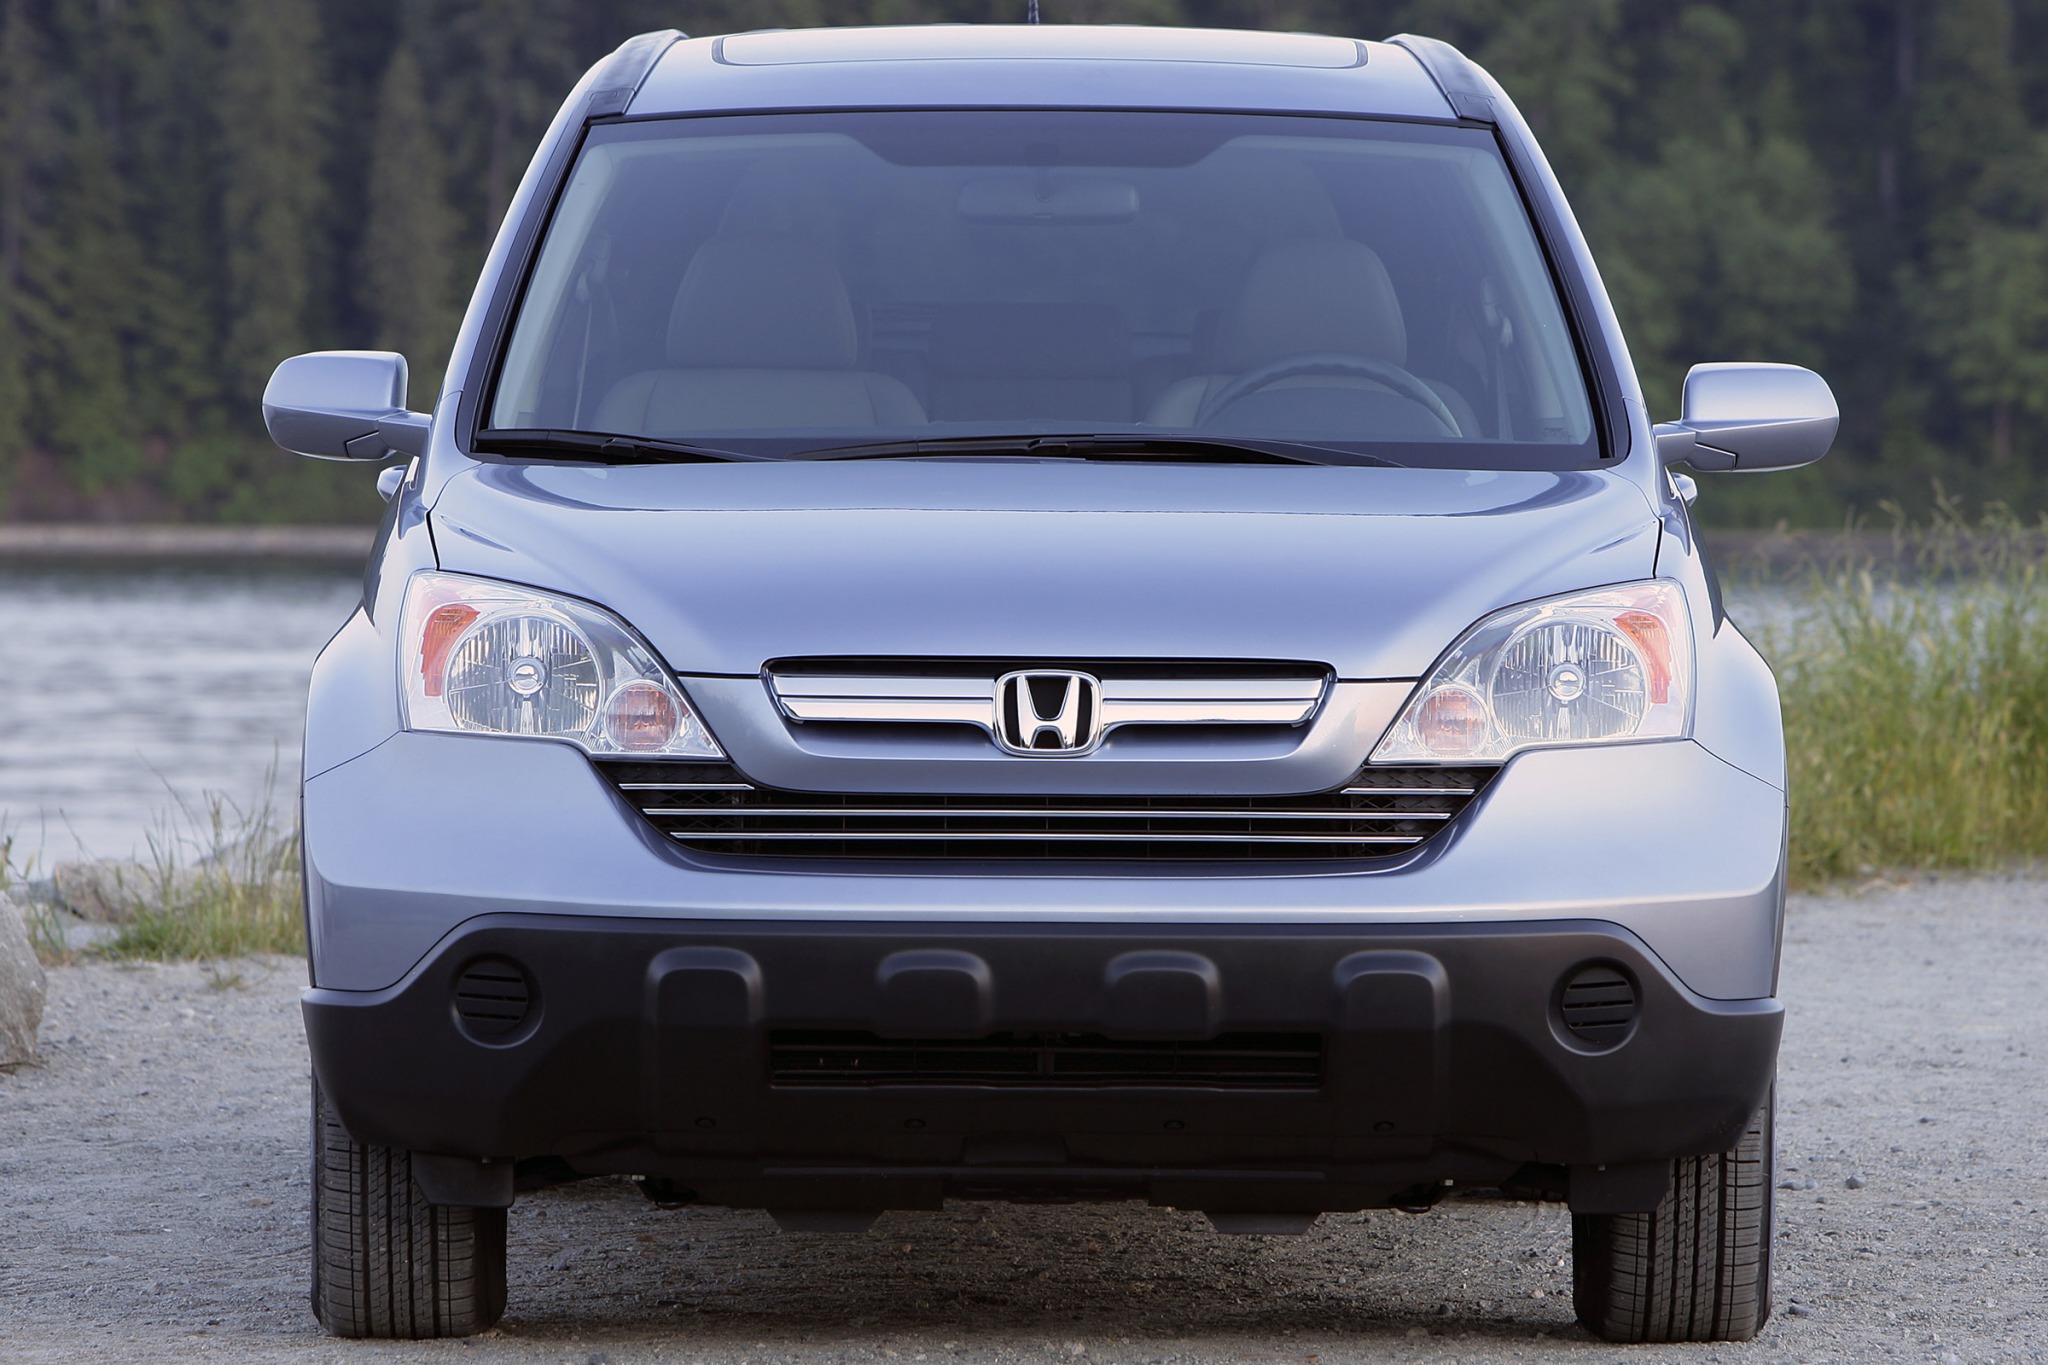 2008 Honda CRV LX 2WD AT VIN Number Search AutoDetective